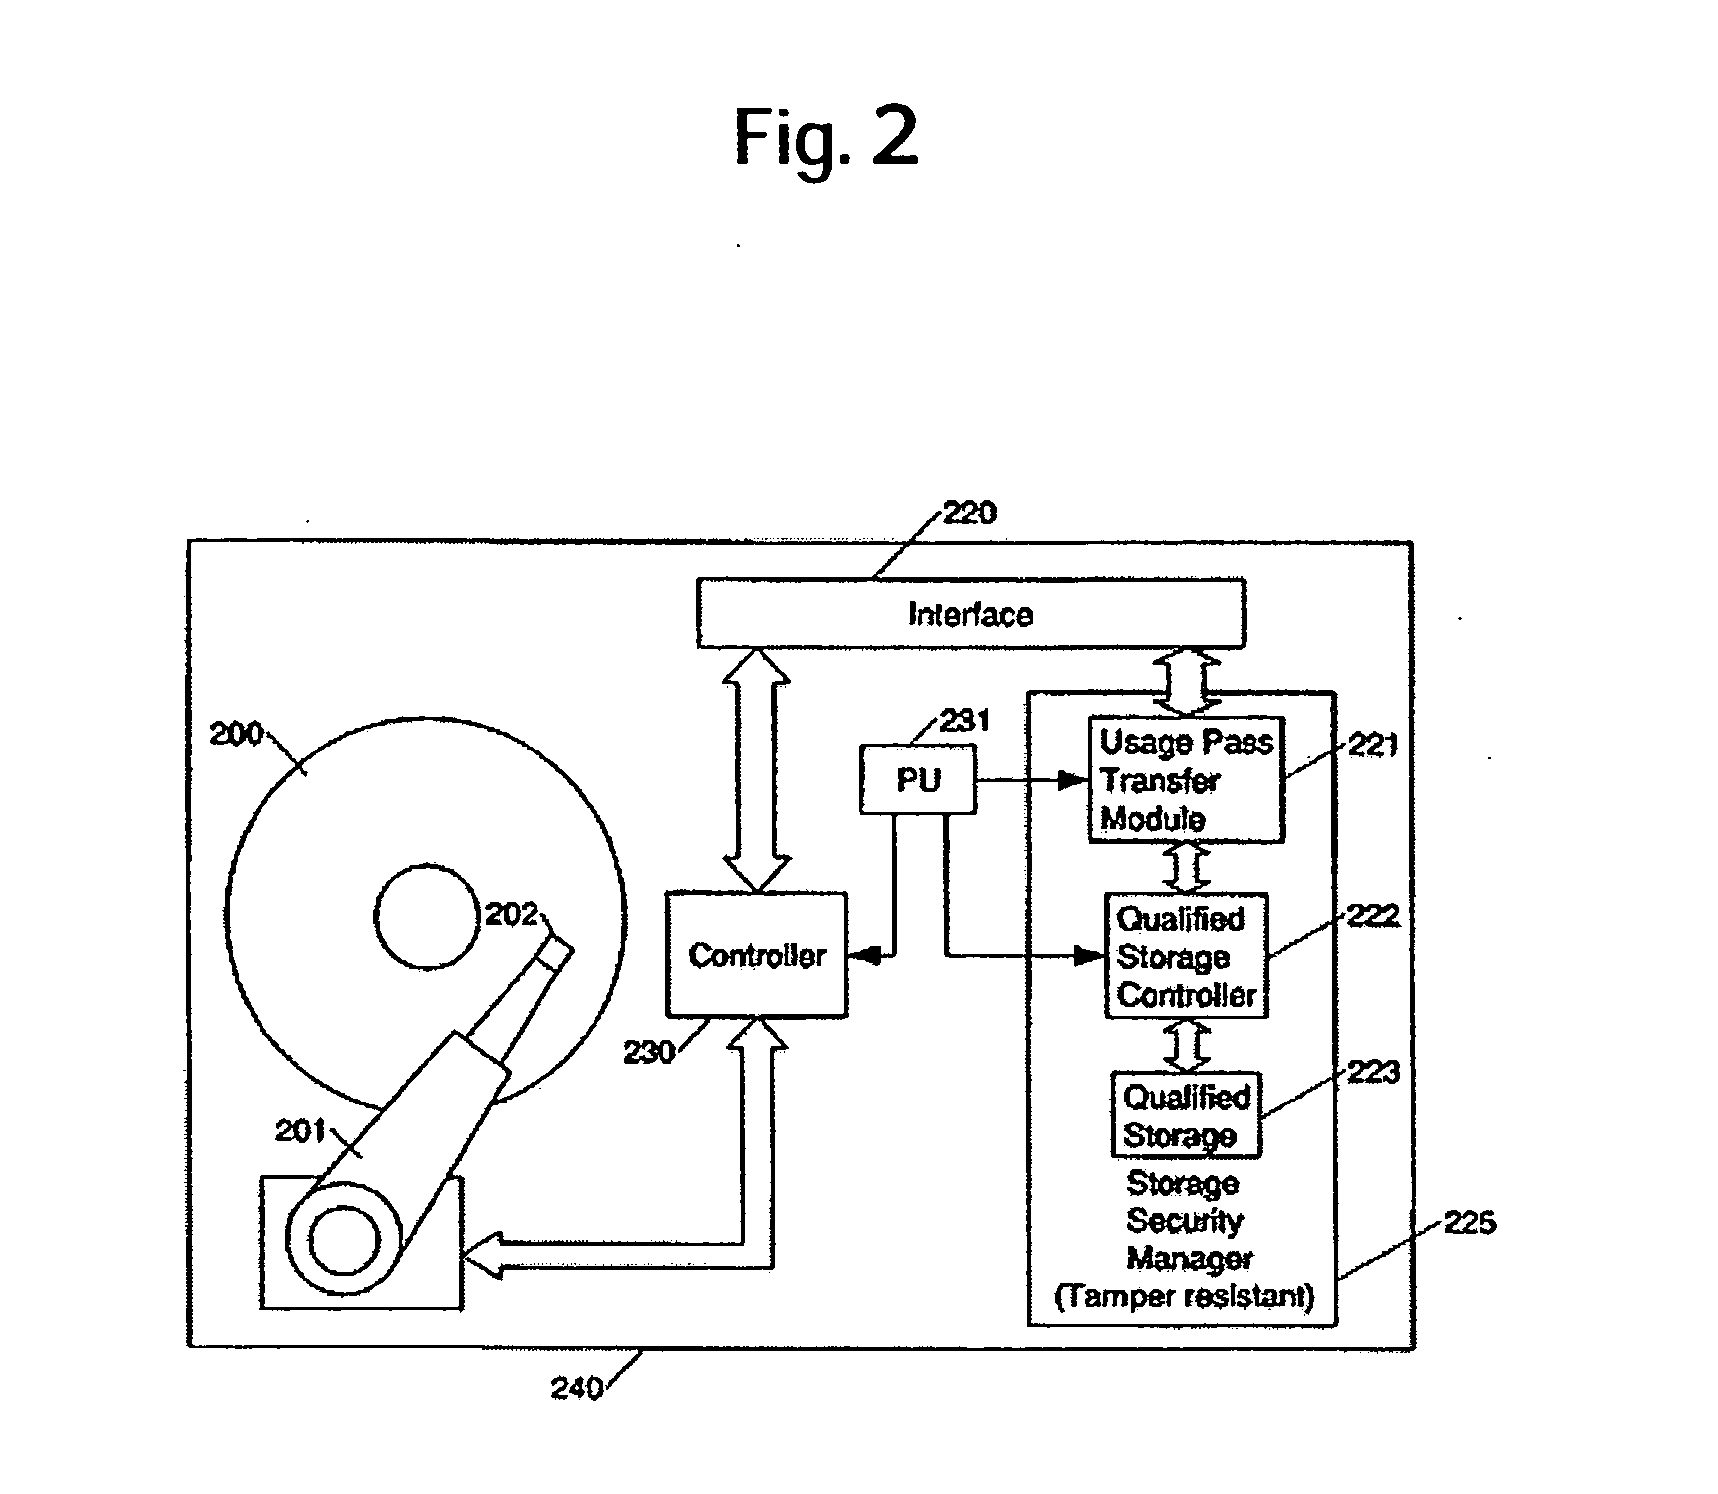 Method and system for transferring data